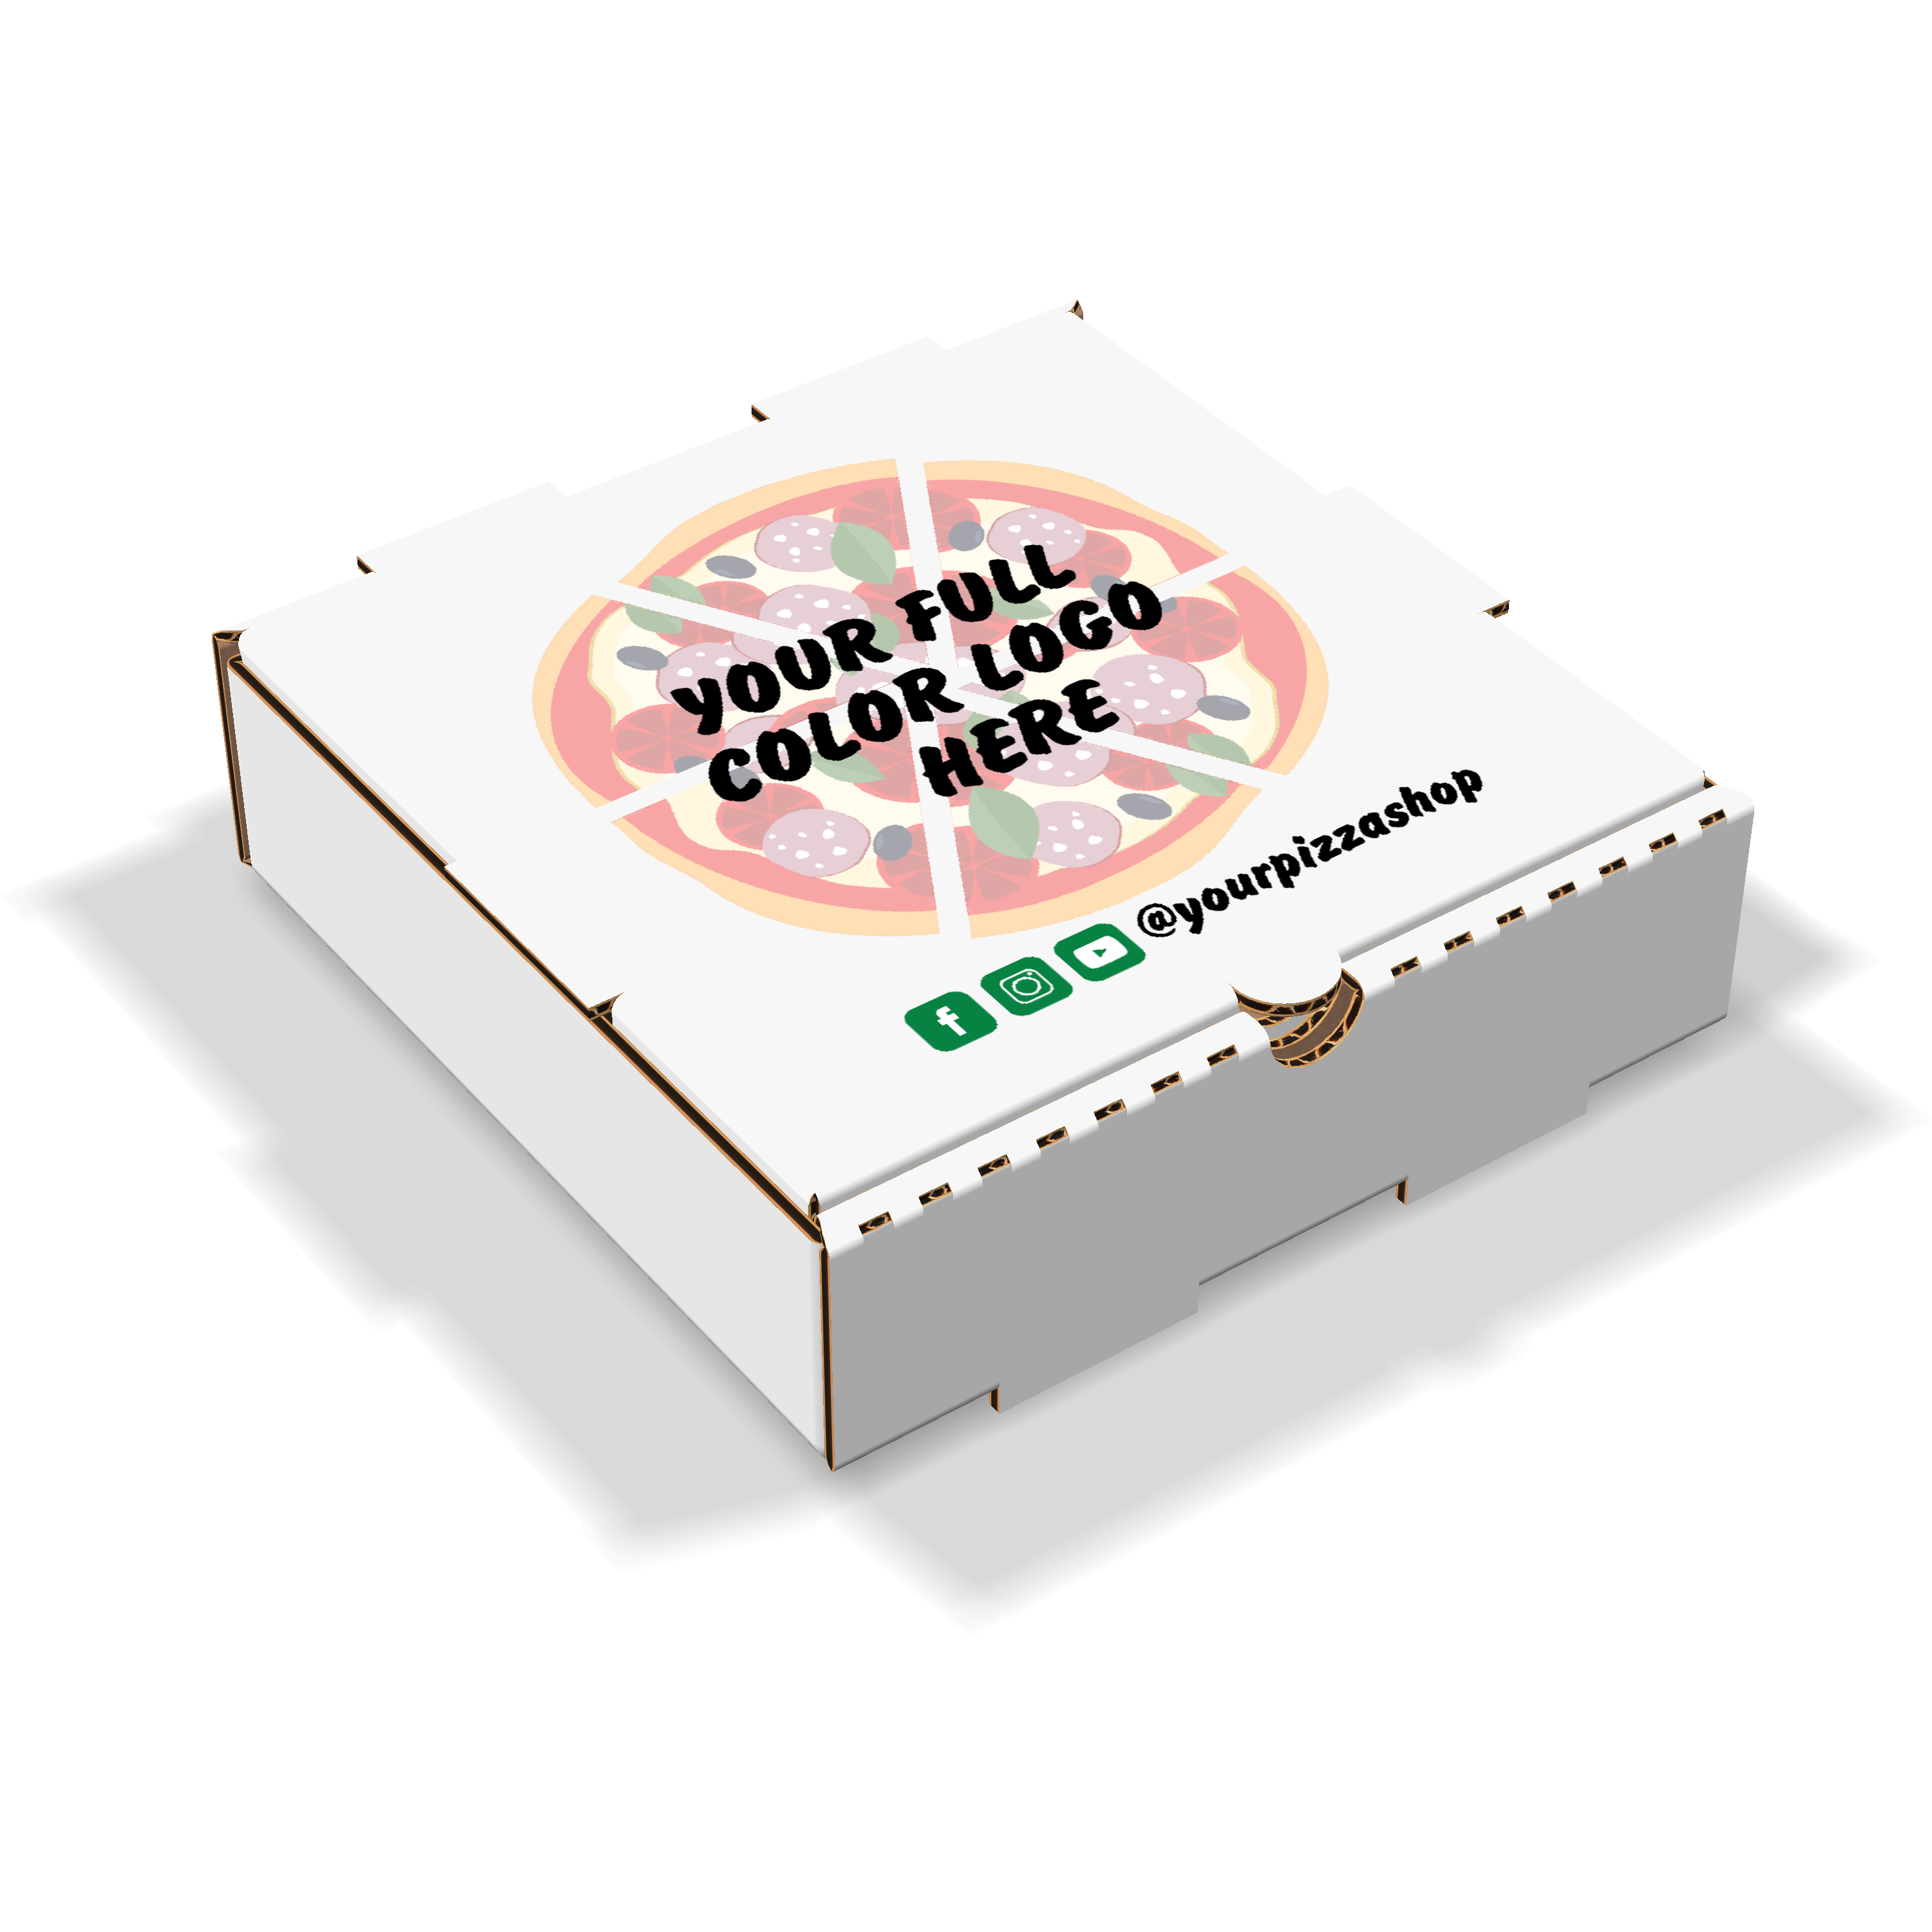 Custom Logo Printed on Top White Pizza Boxes - 25 Pcs Corrugated Take Out Cardboard Delivery Pizza Boxes